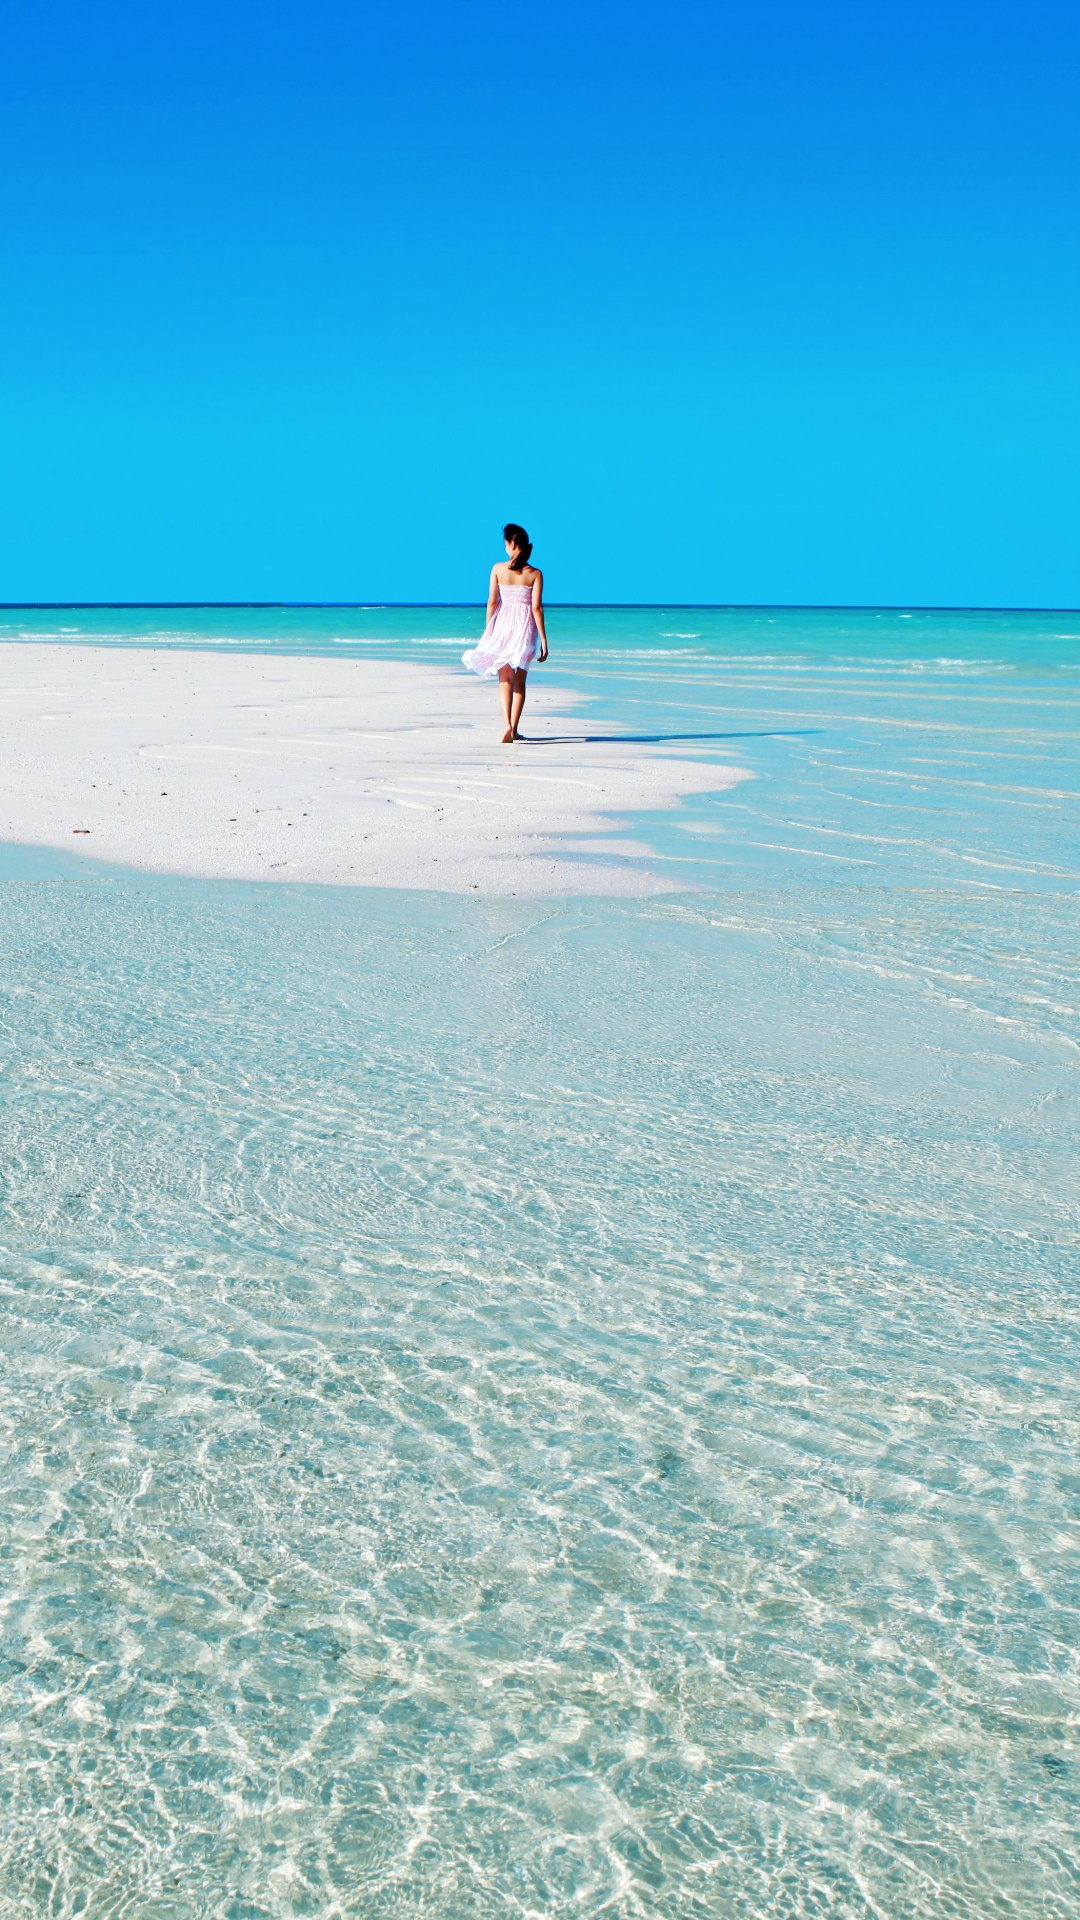 Woman in White Shirt Walking on Beach During Daytime. Wallpaper in 1080x1920 Resolution